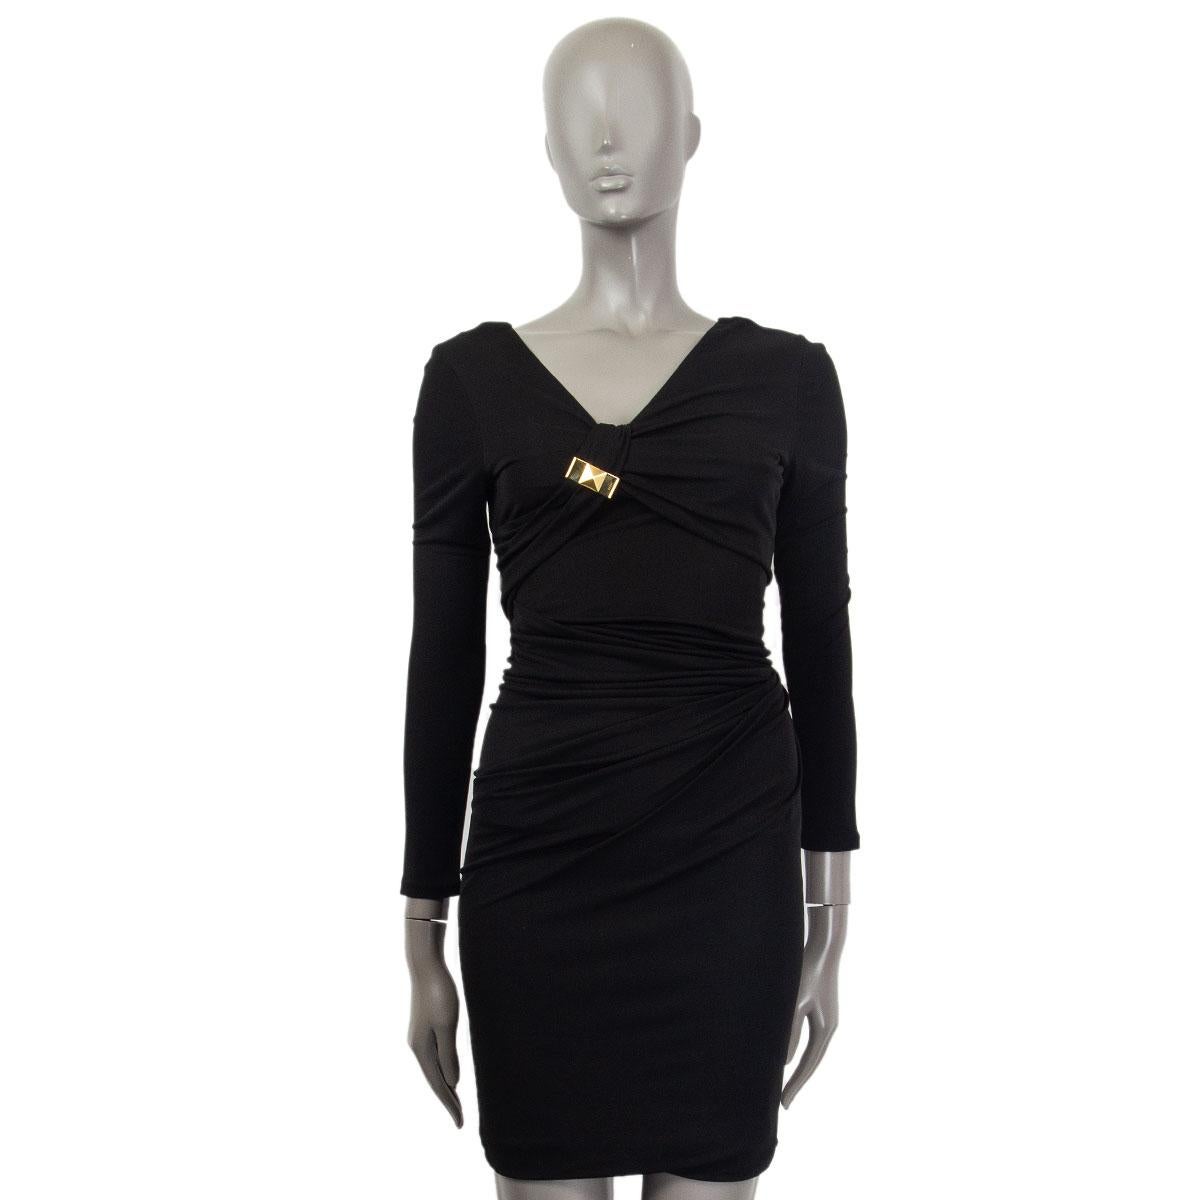 100% authentic Gucci sleeveless draped bodycon dress in black viscose (100%) with a lining in acetate (65%) and nylon (35%) with a gold-tone metal pyramid detail at front. Opens with a zipper on the back. Has been worn and is in excellent condition.